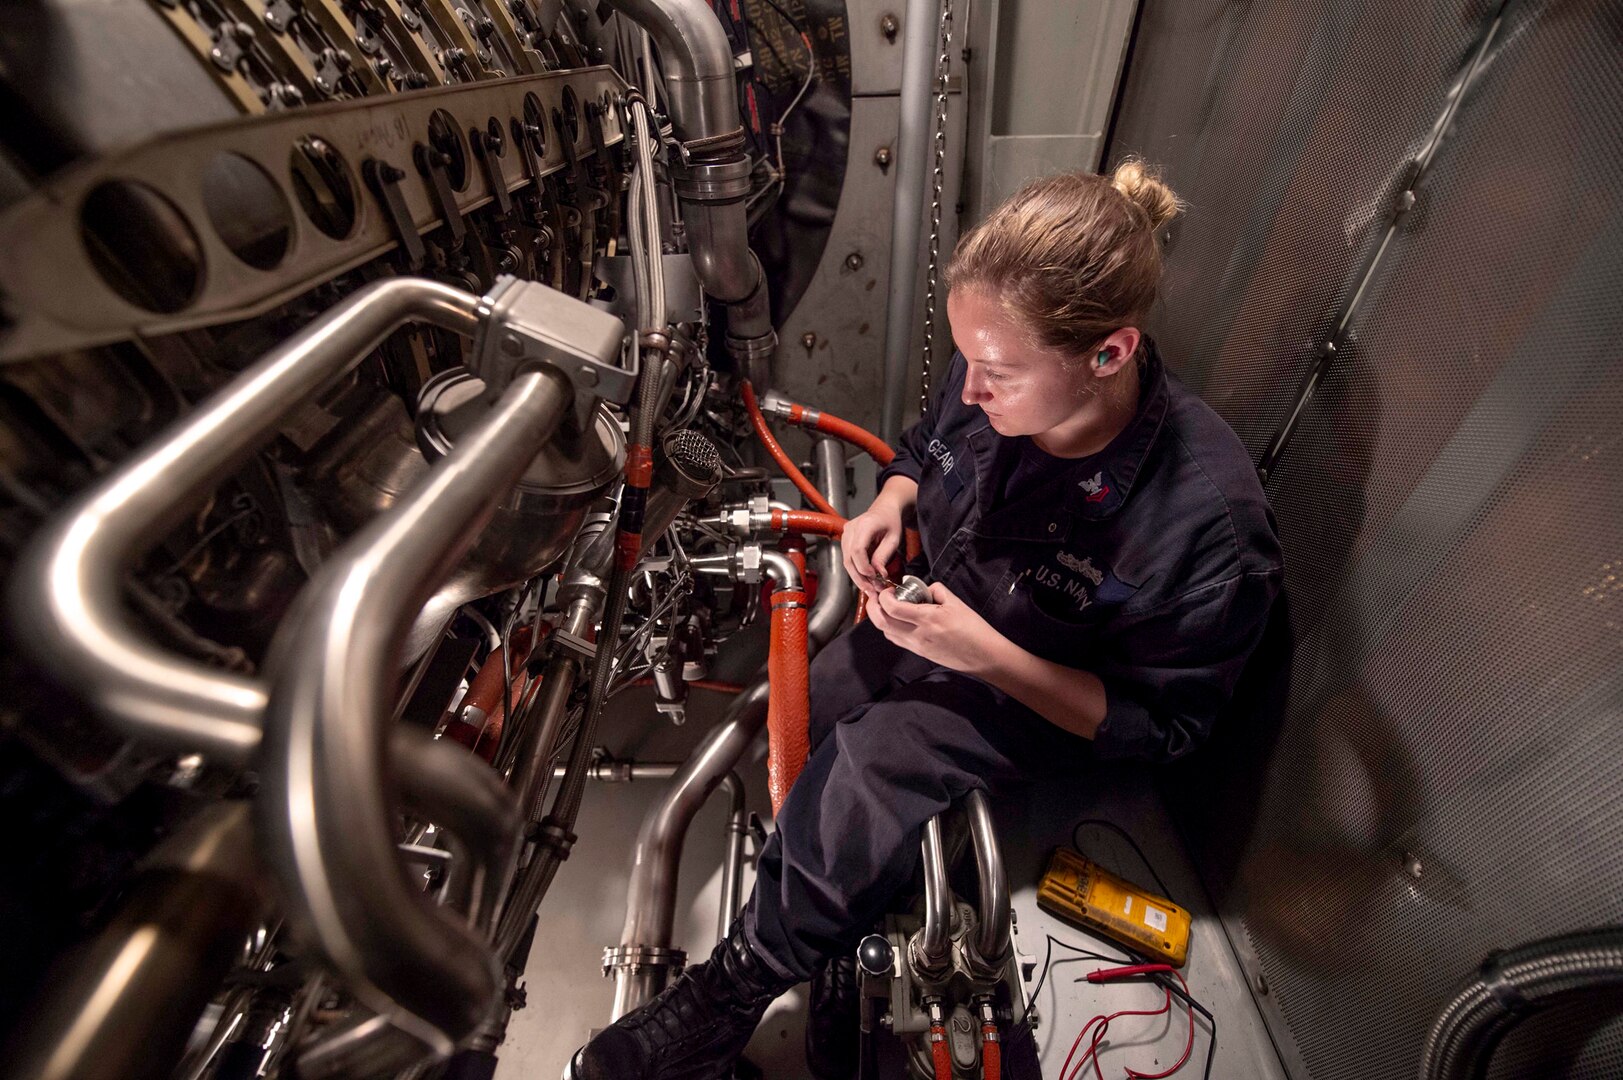 Image of a female sailor inside an engine compartment performing maintenance.